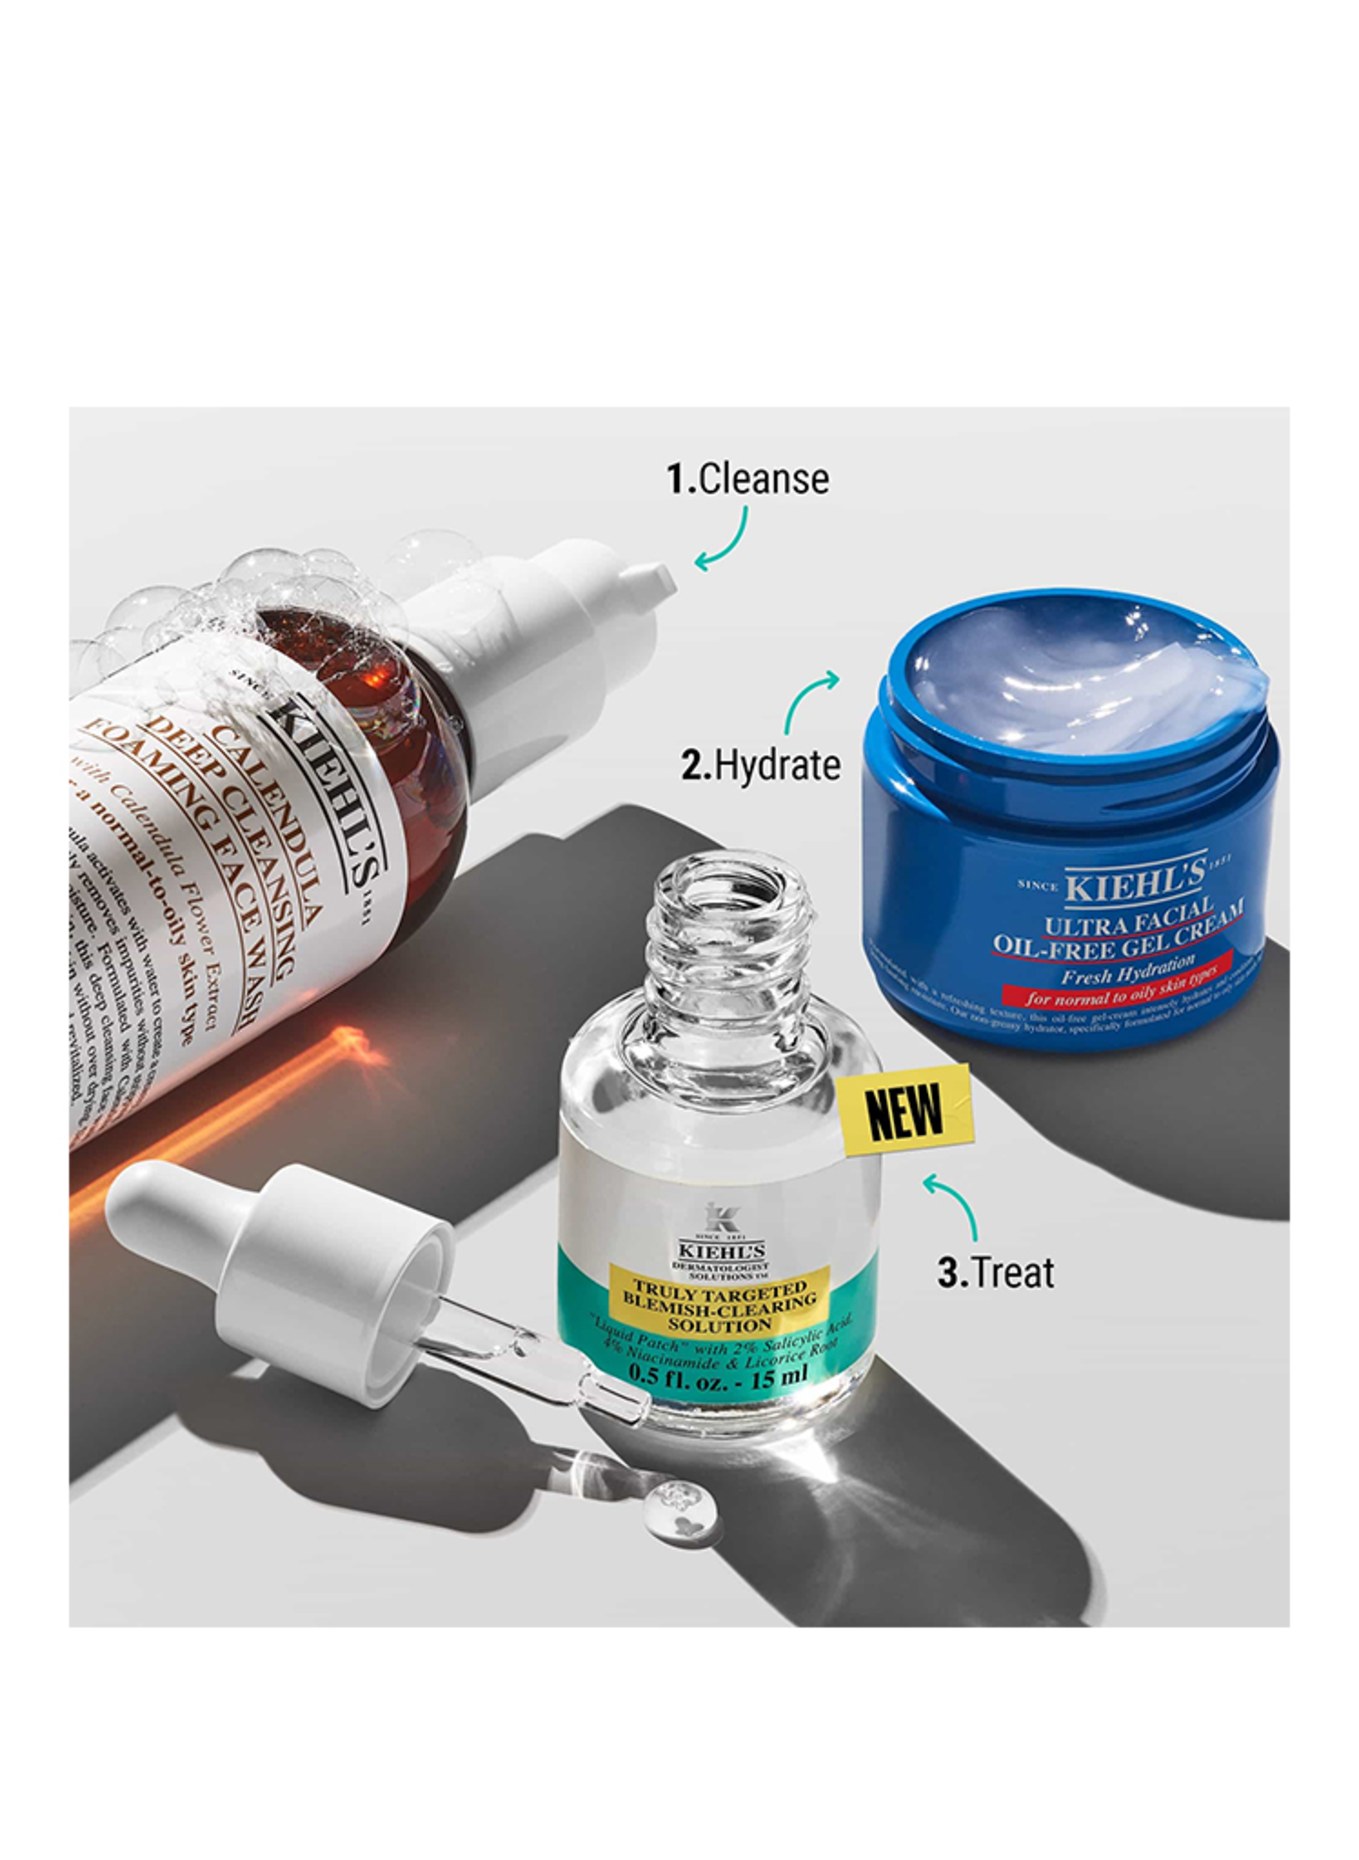 Kiehl's TRULY TARGETED BLEMISH CLEARING SOLUTION (Obrázek 6)